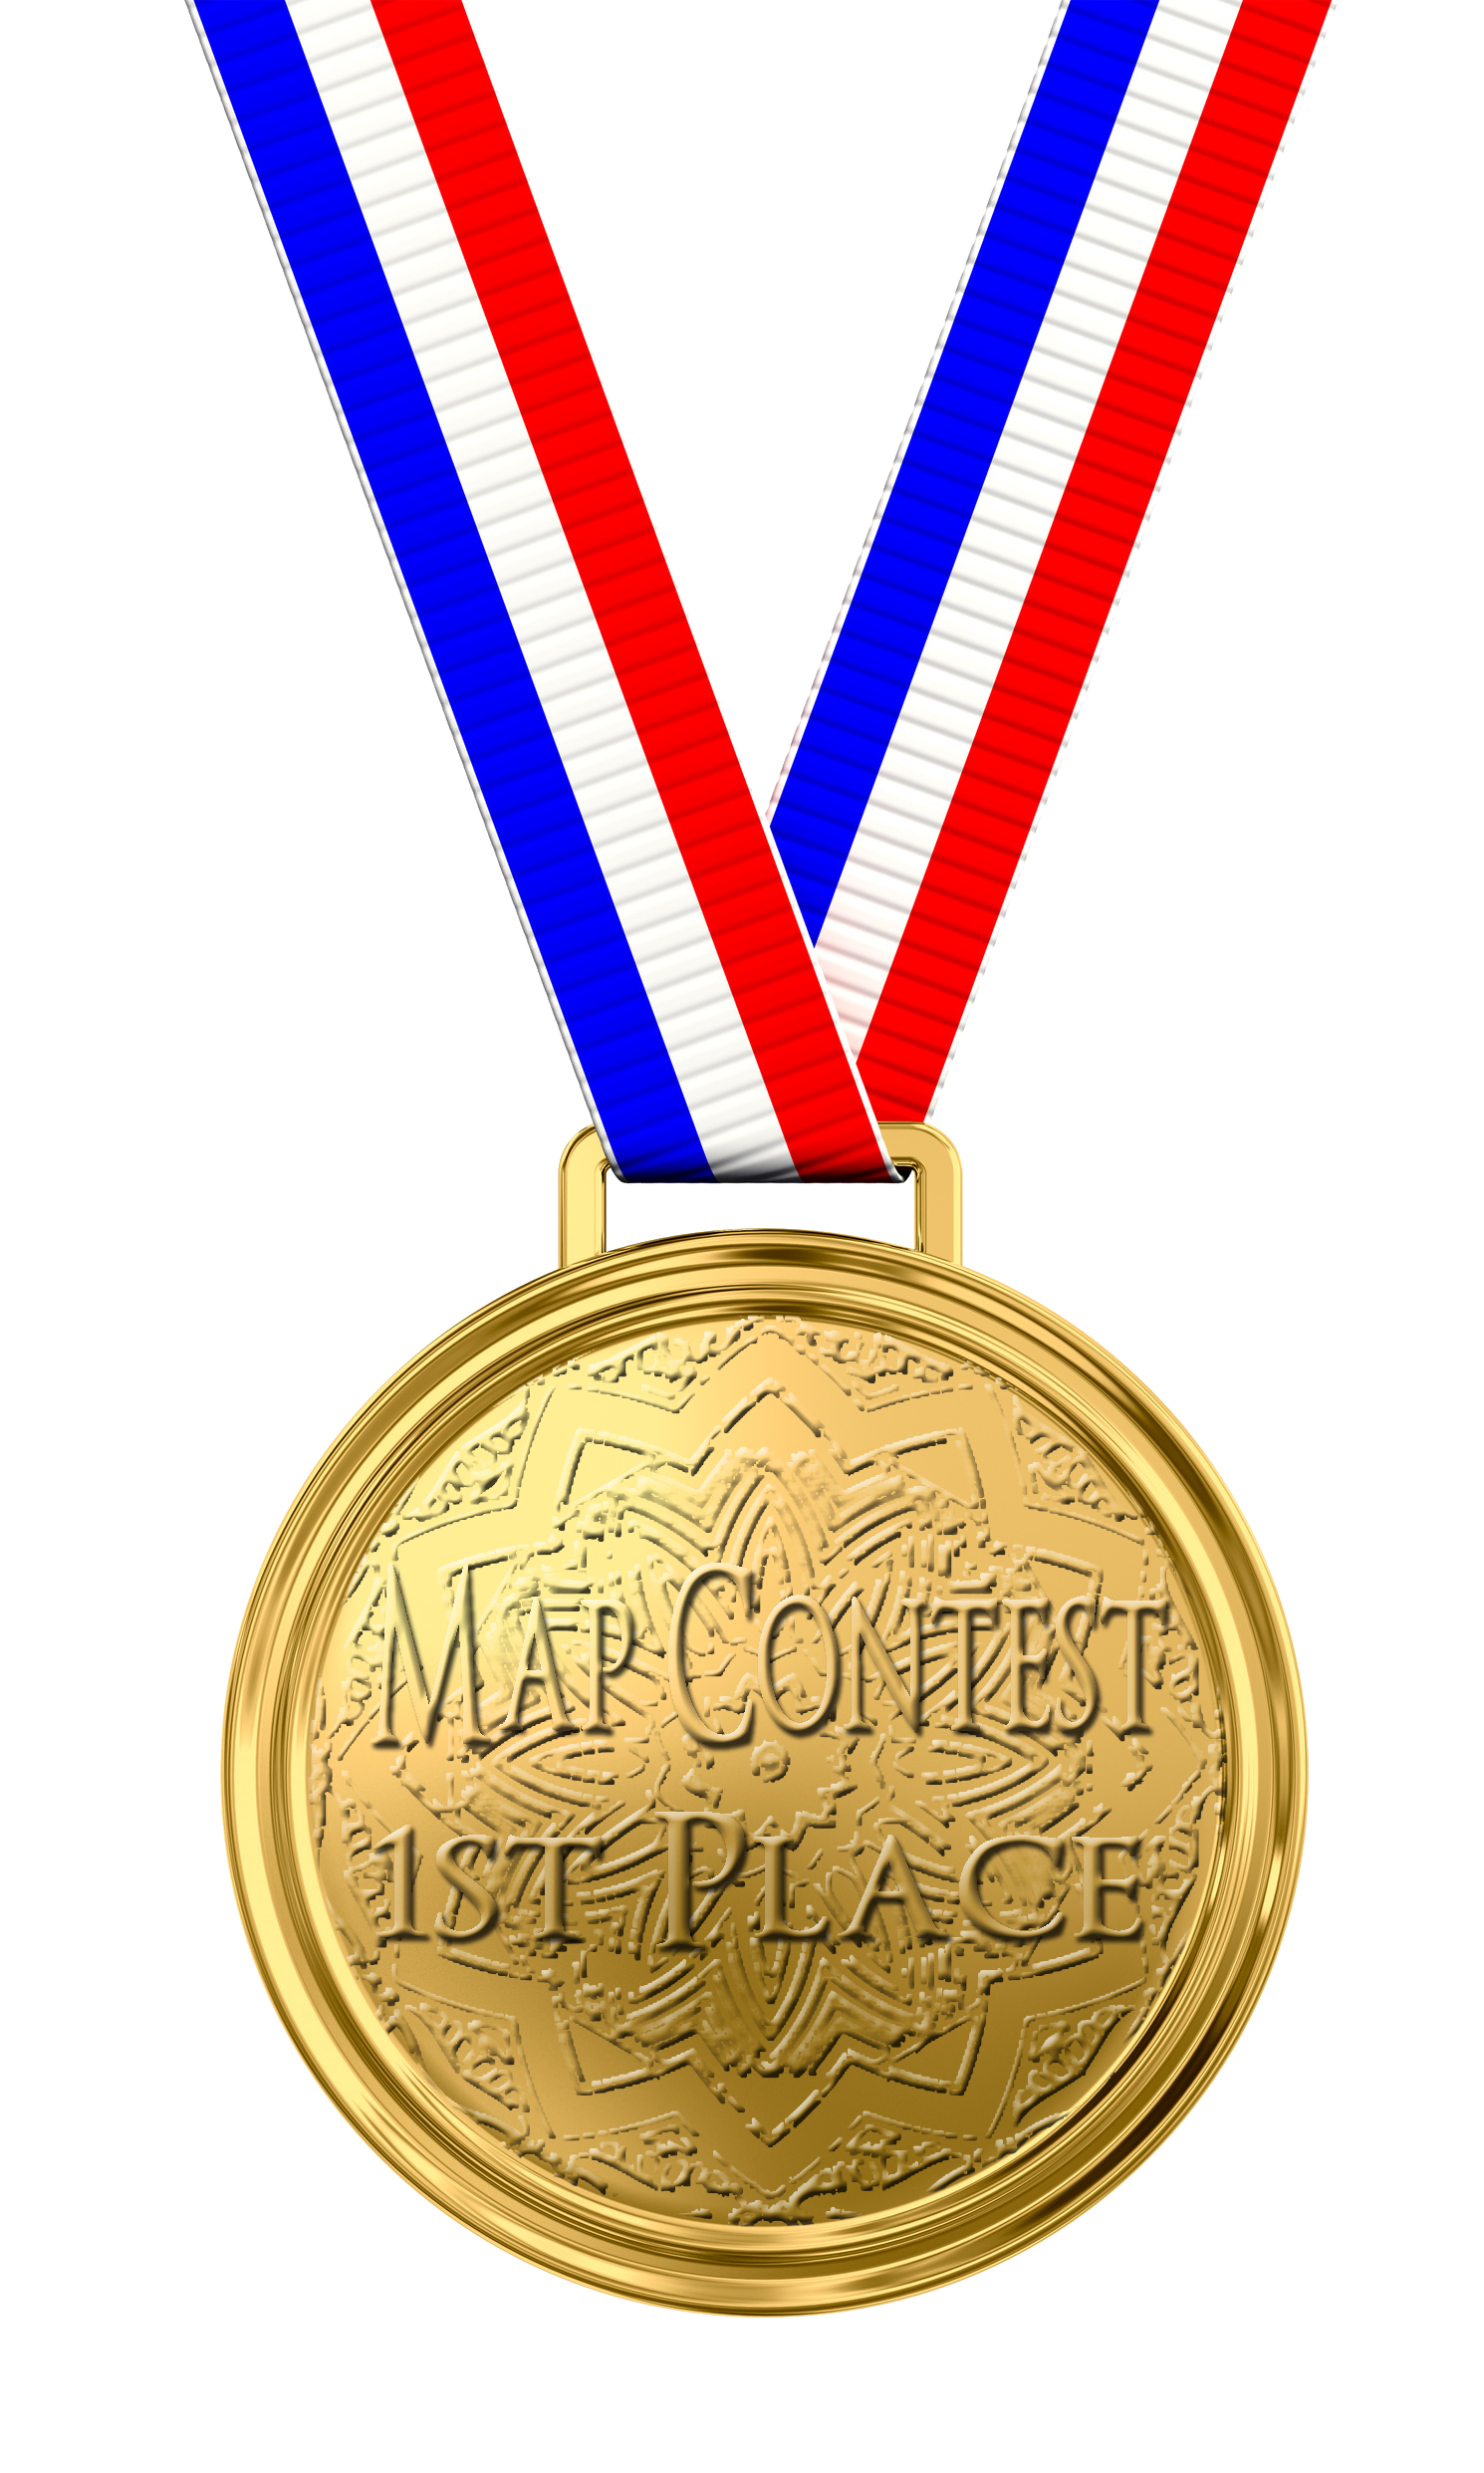 1st Place Medal PNG Image